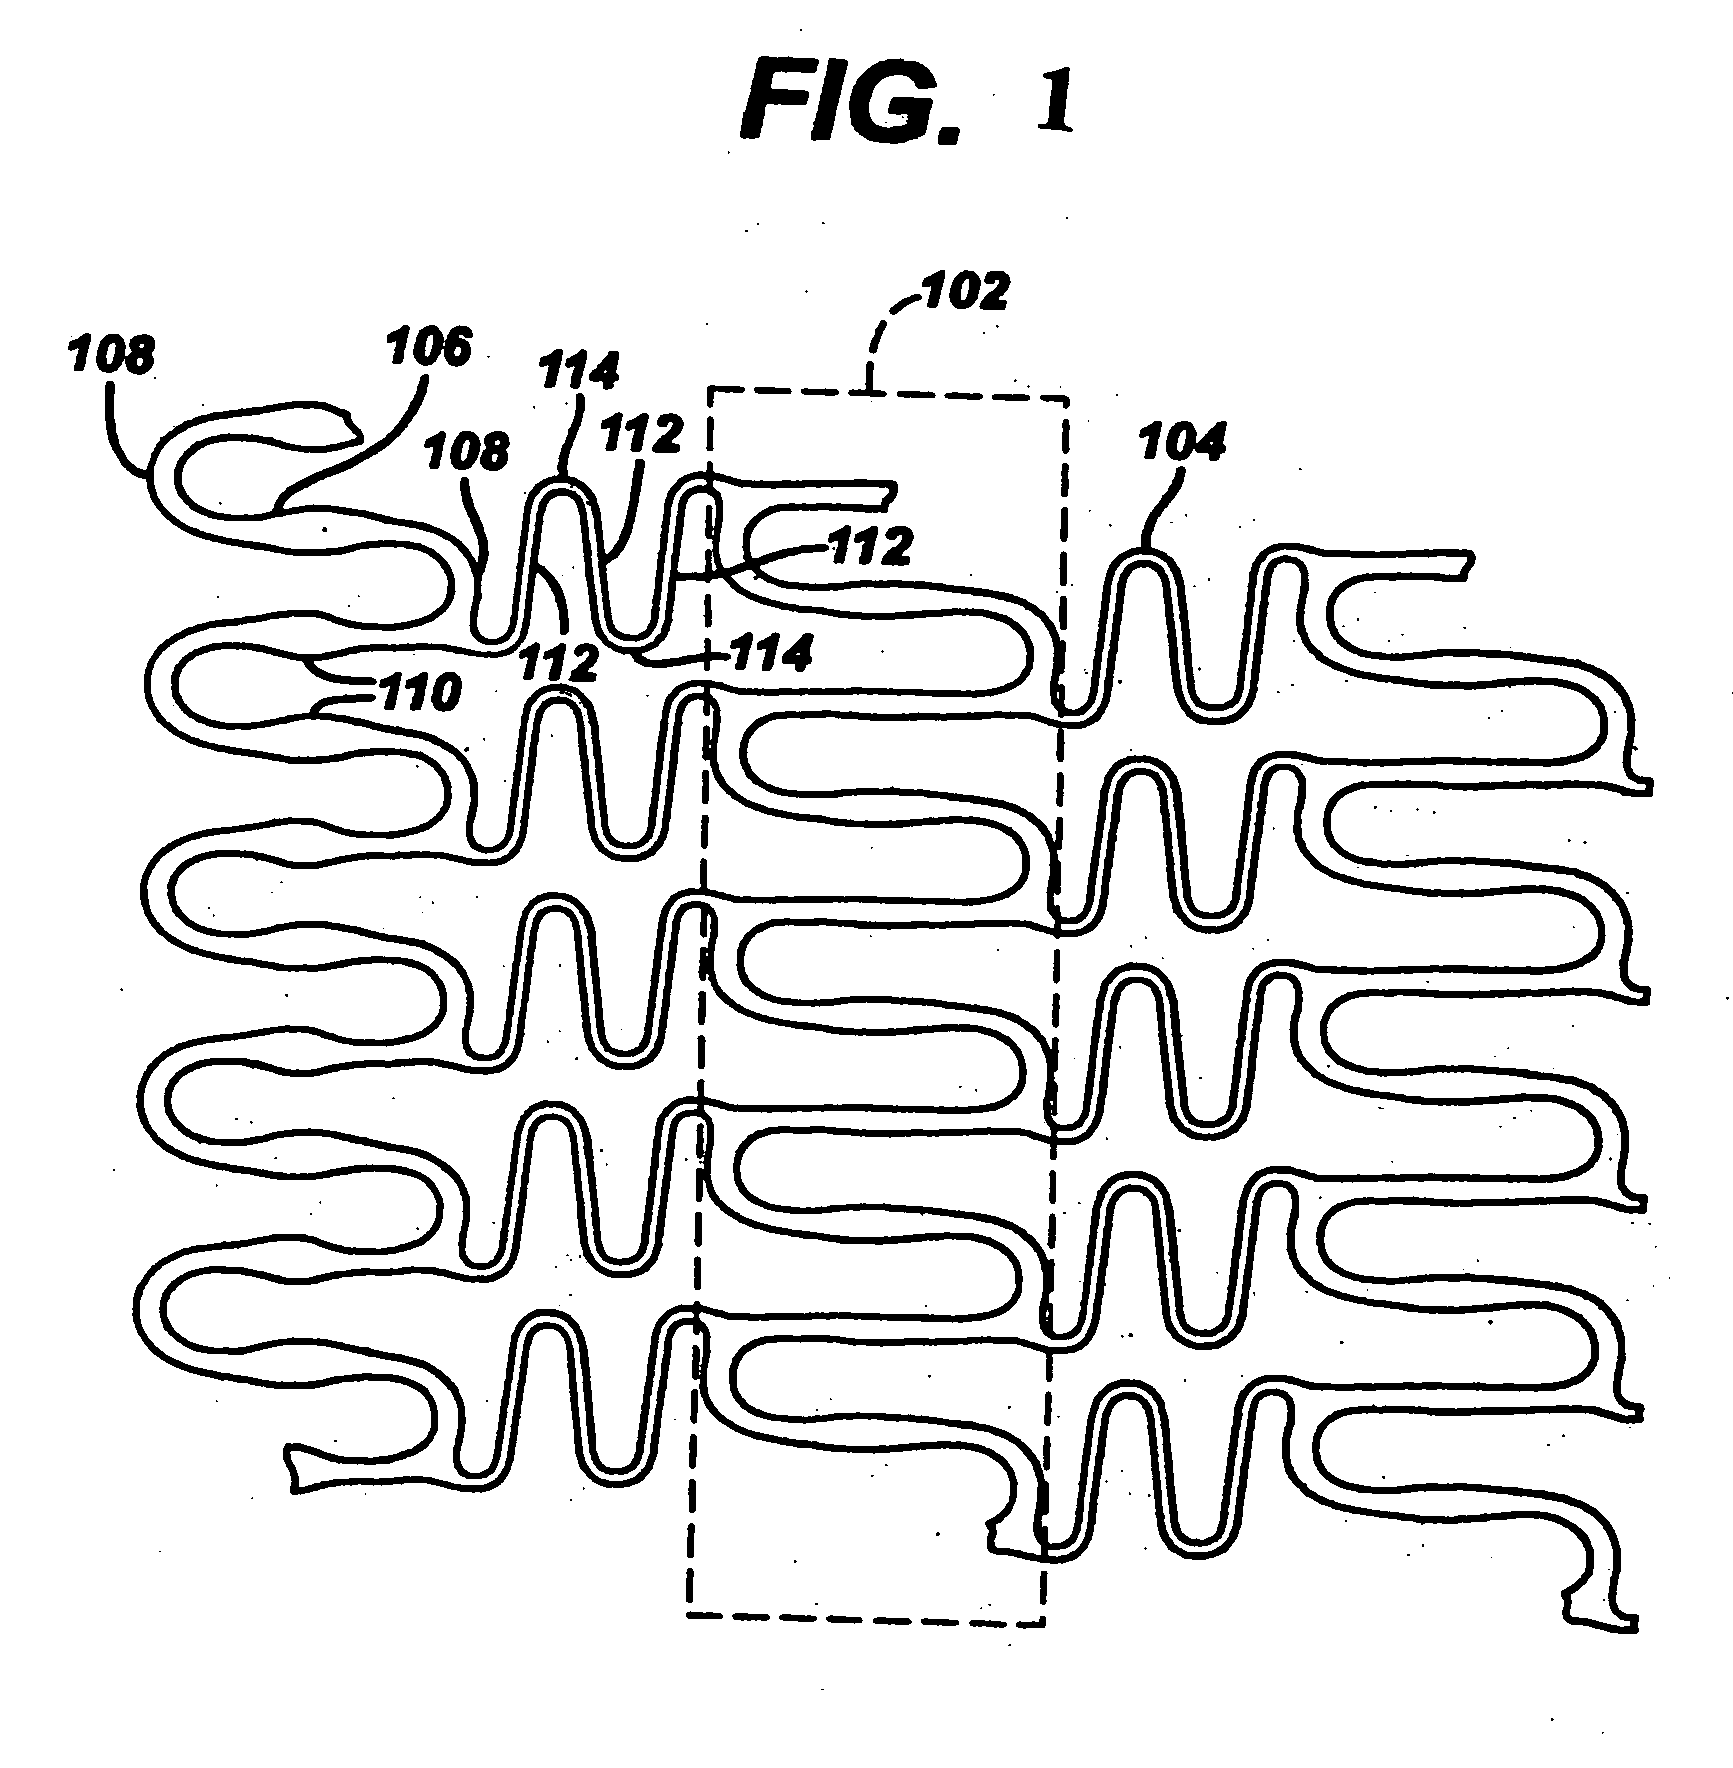 Polymeric stent having modified molecular structures in both the hoops and selected segments of the flexible connectors